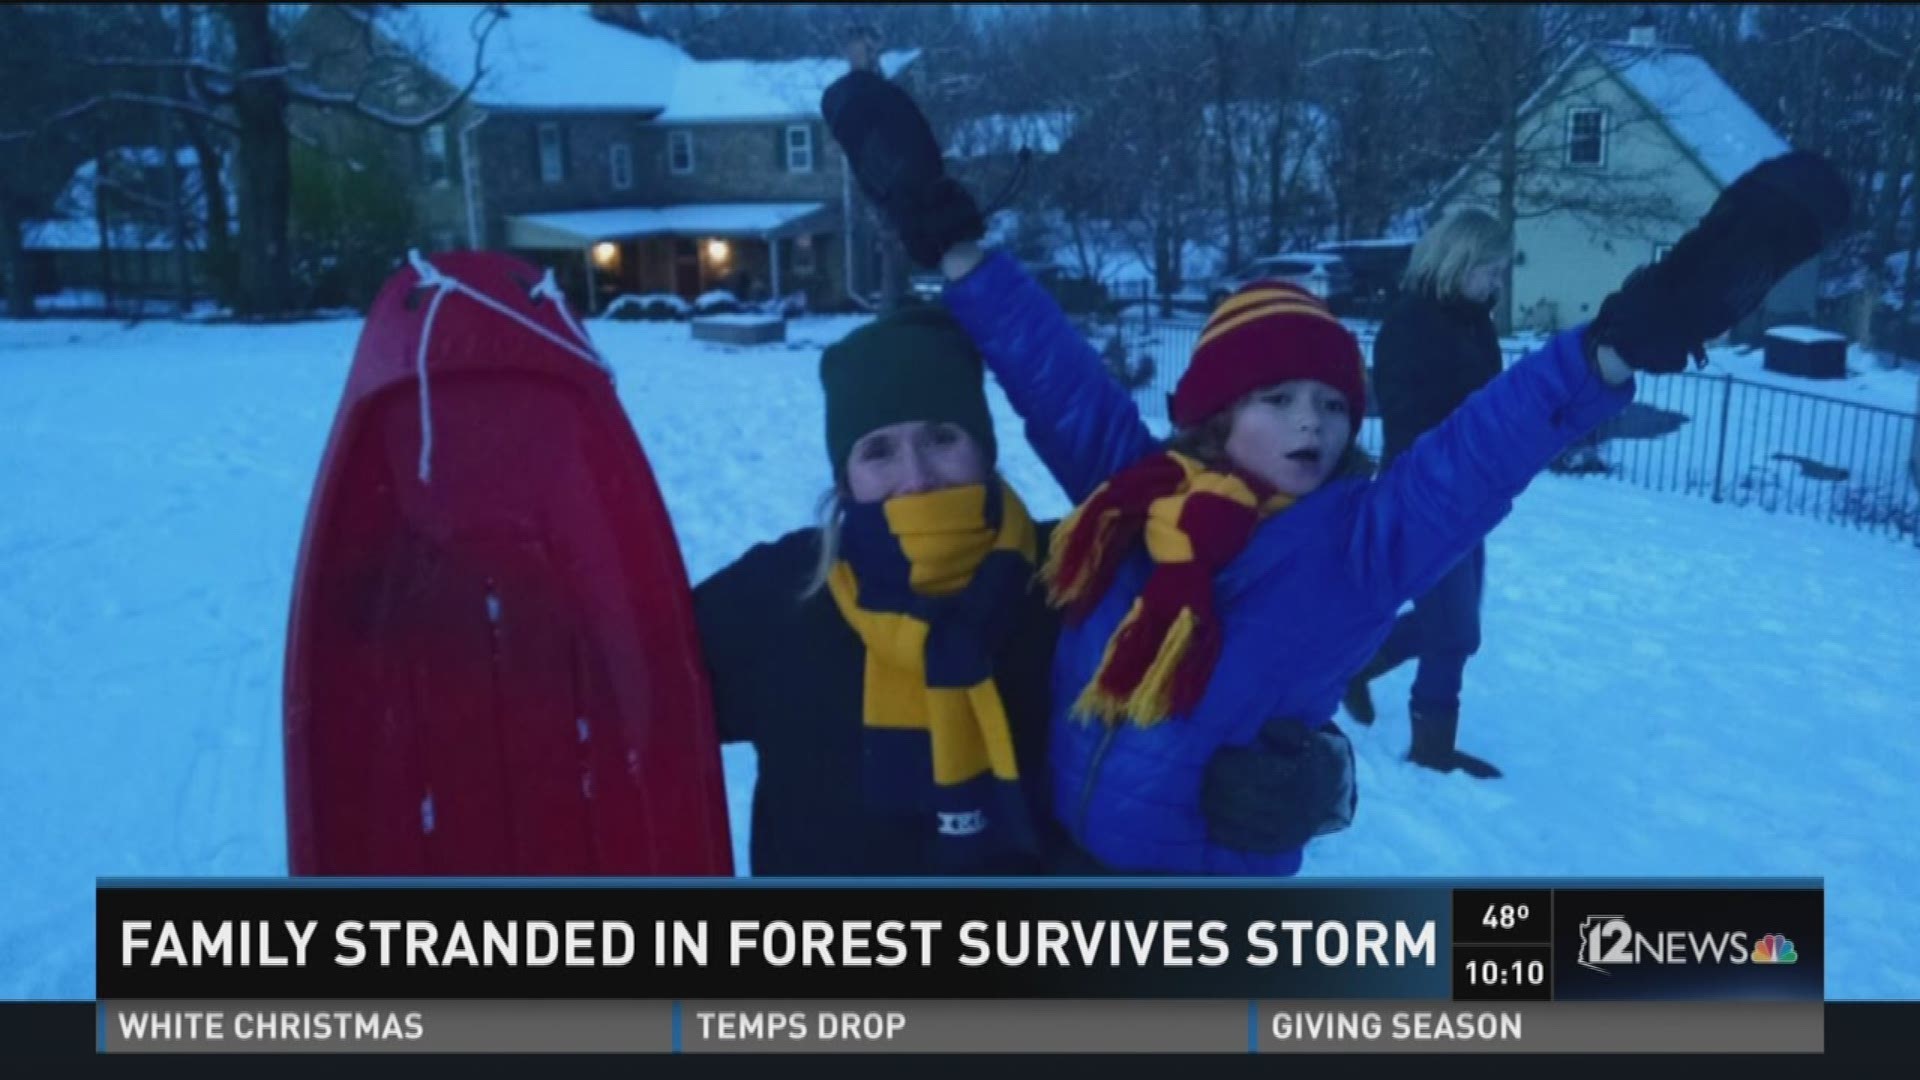 Family stranded in forest survives storm